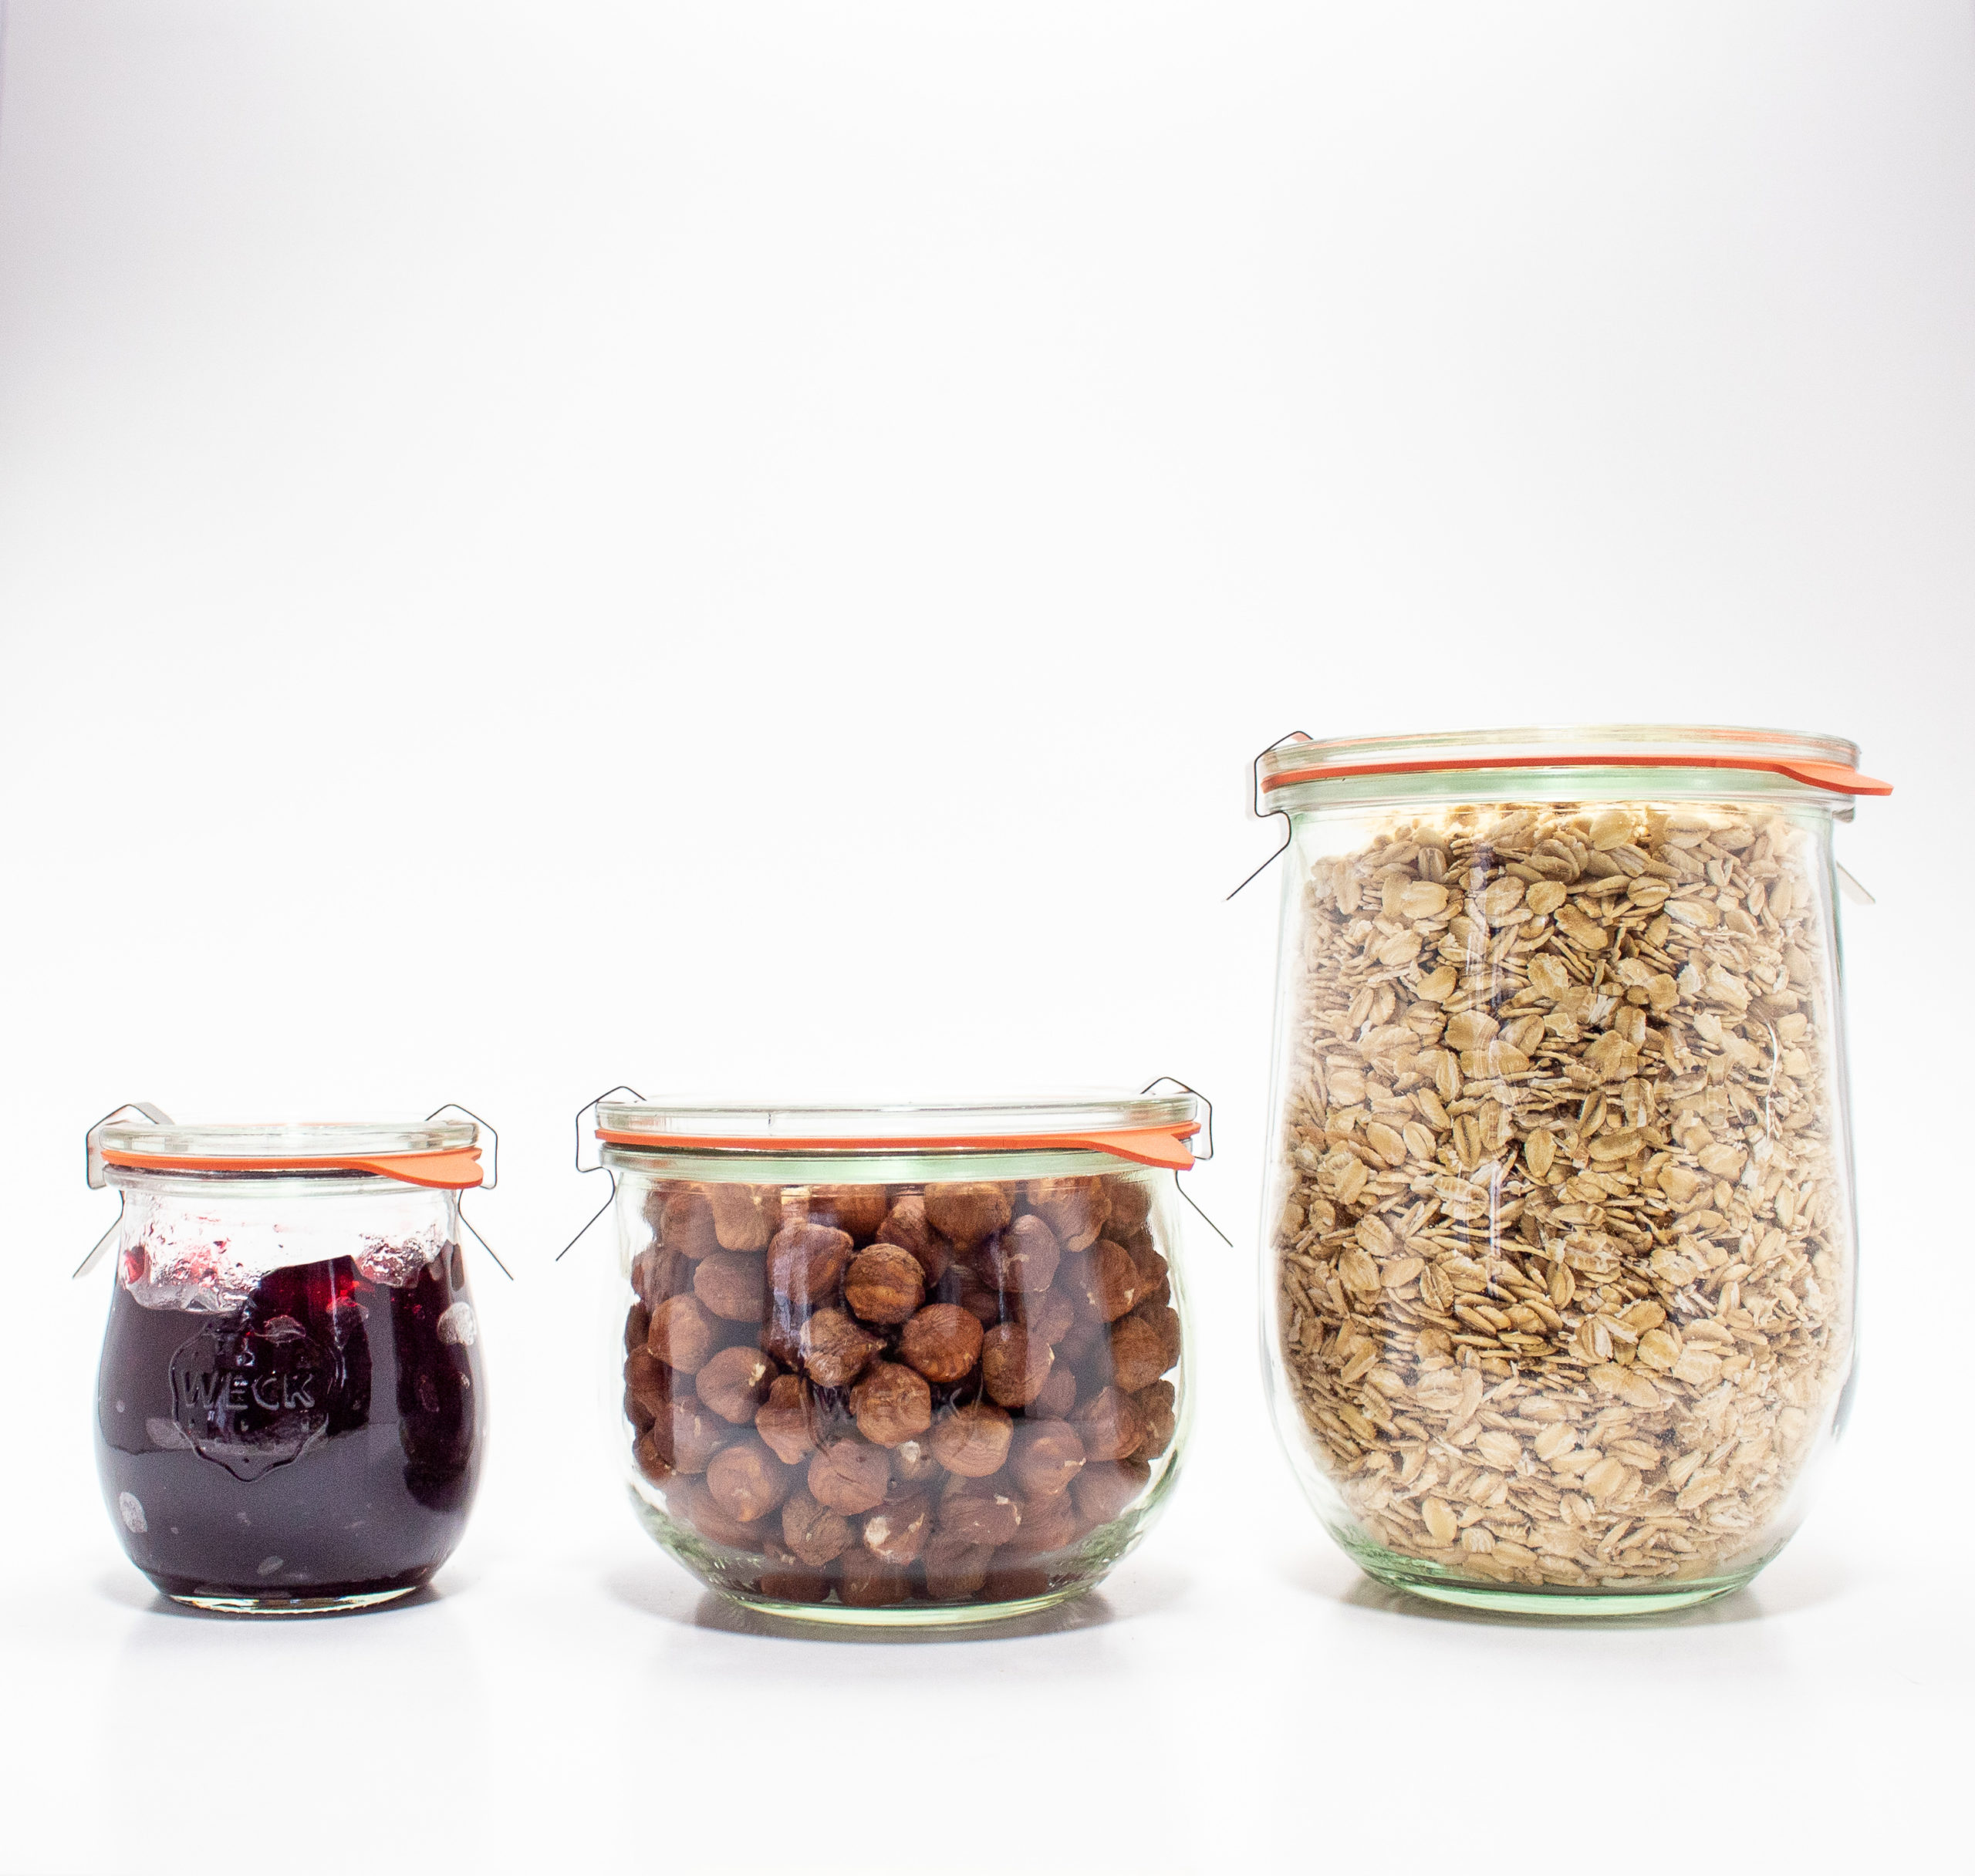 Why Mason Jars Are the Best Sustainable Food Storage Containers